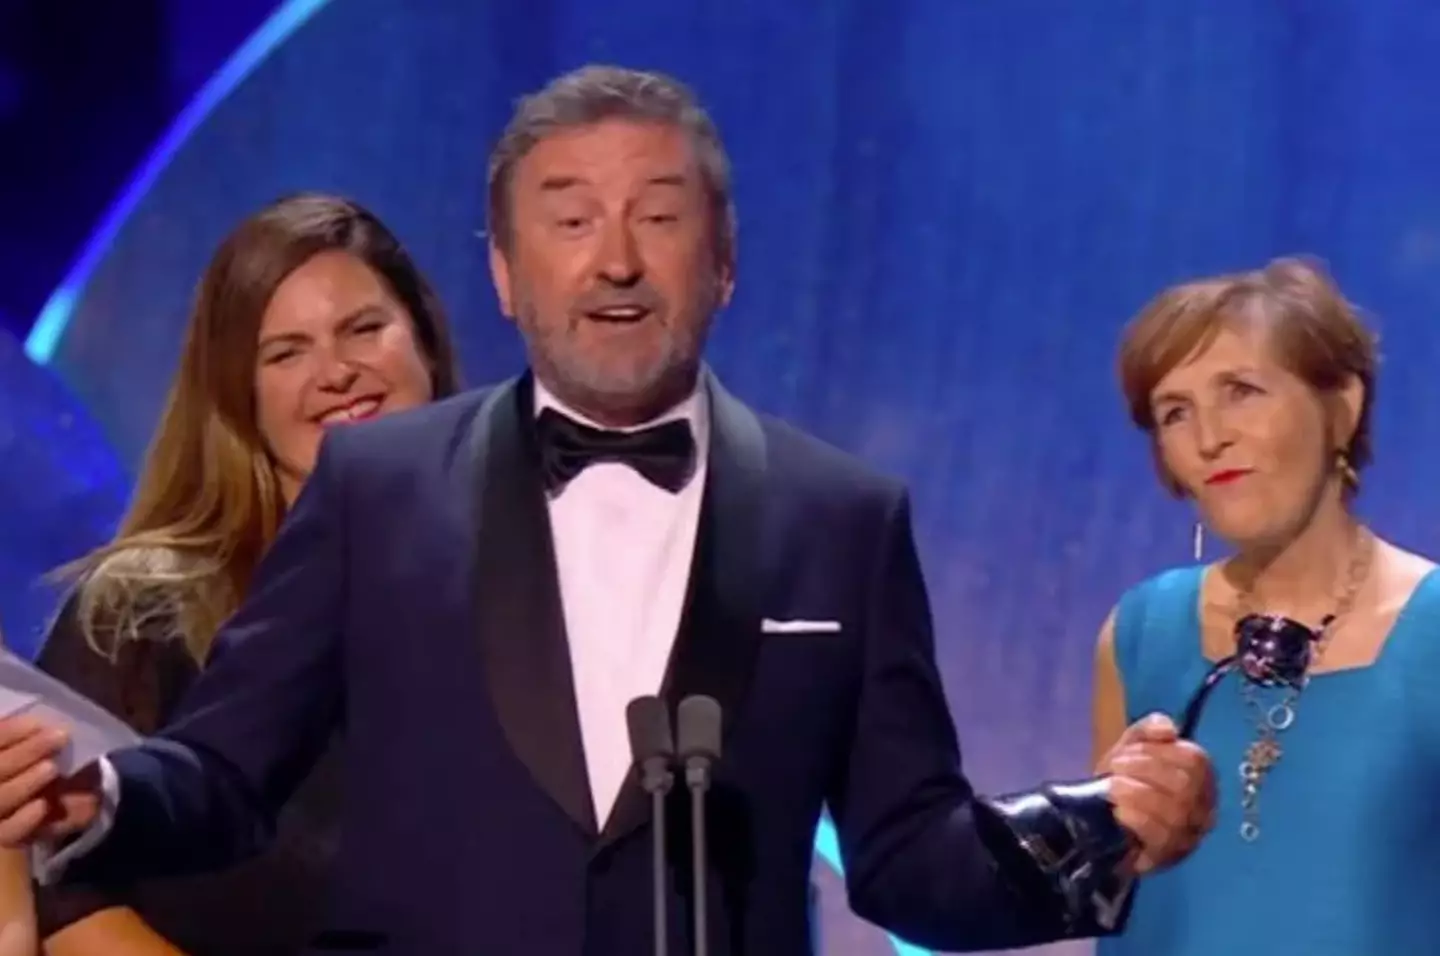 Lee Mack picked up the Quiz Game Show award.